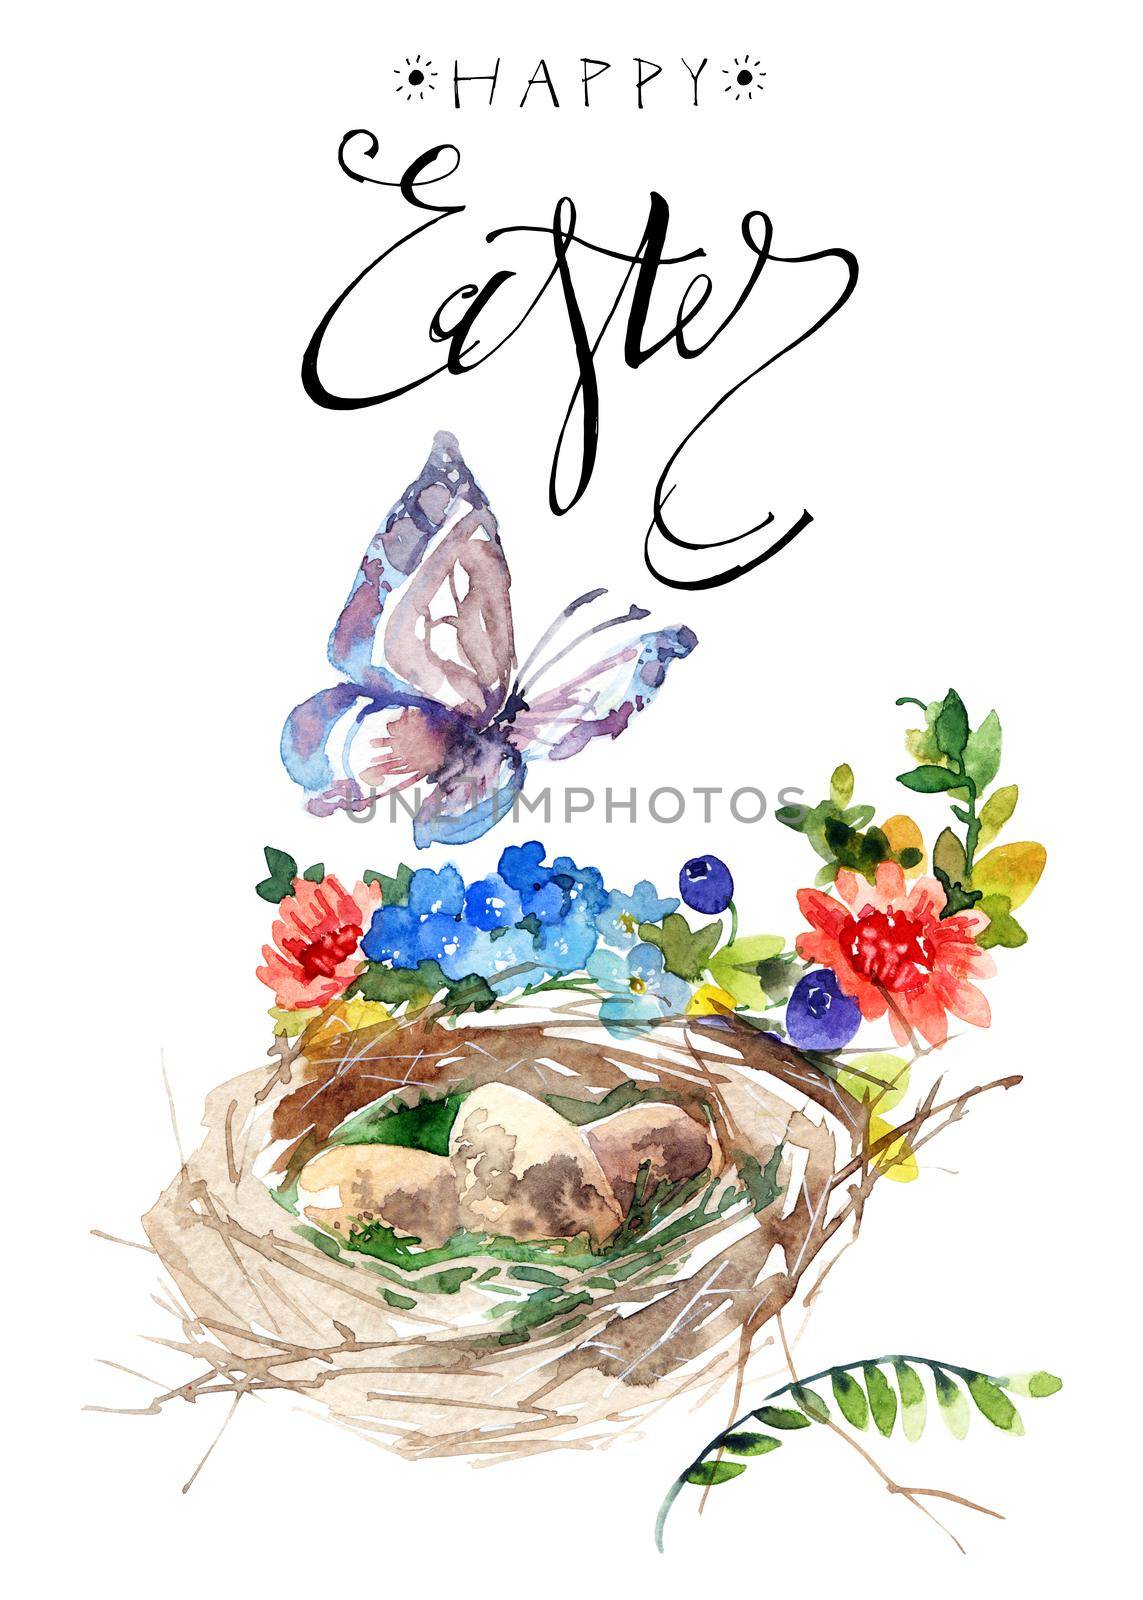 Watercolor illustration of bird nest with eggs, flowers and butterfly. Greeting card for Easter with calligraphy lettering "Happy Easter"